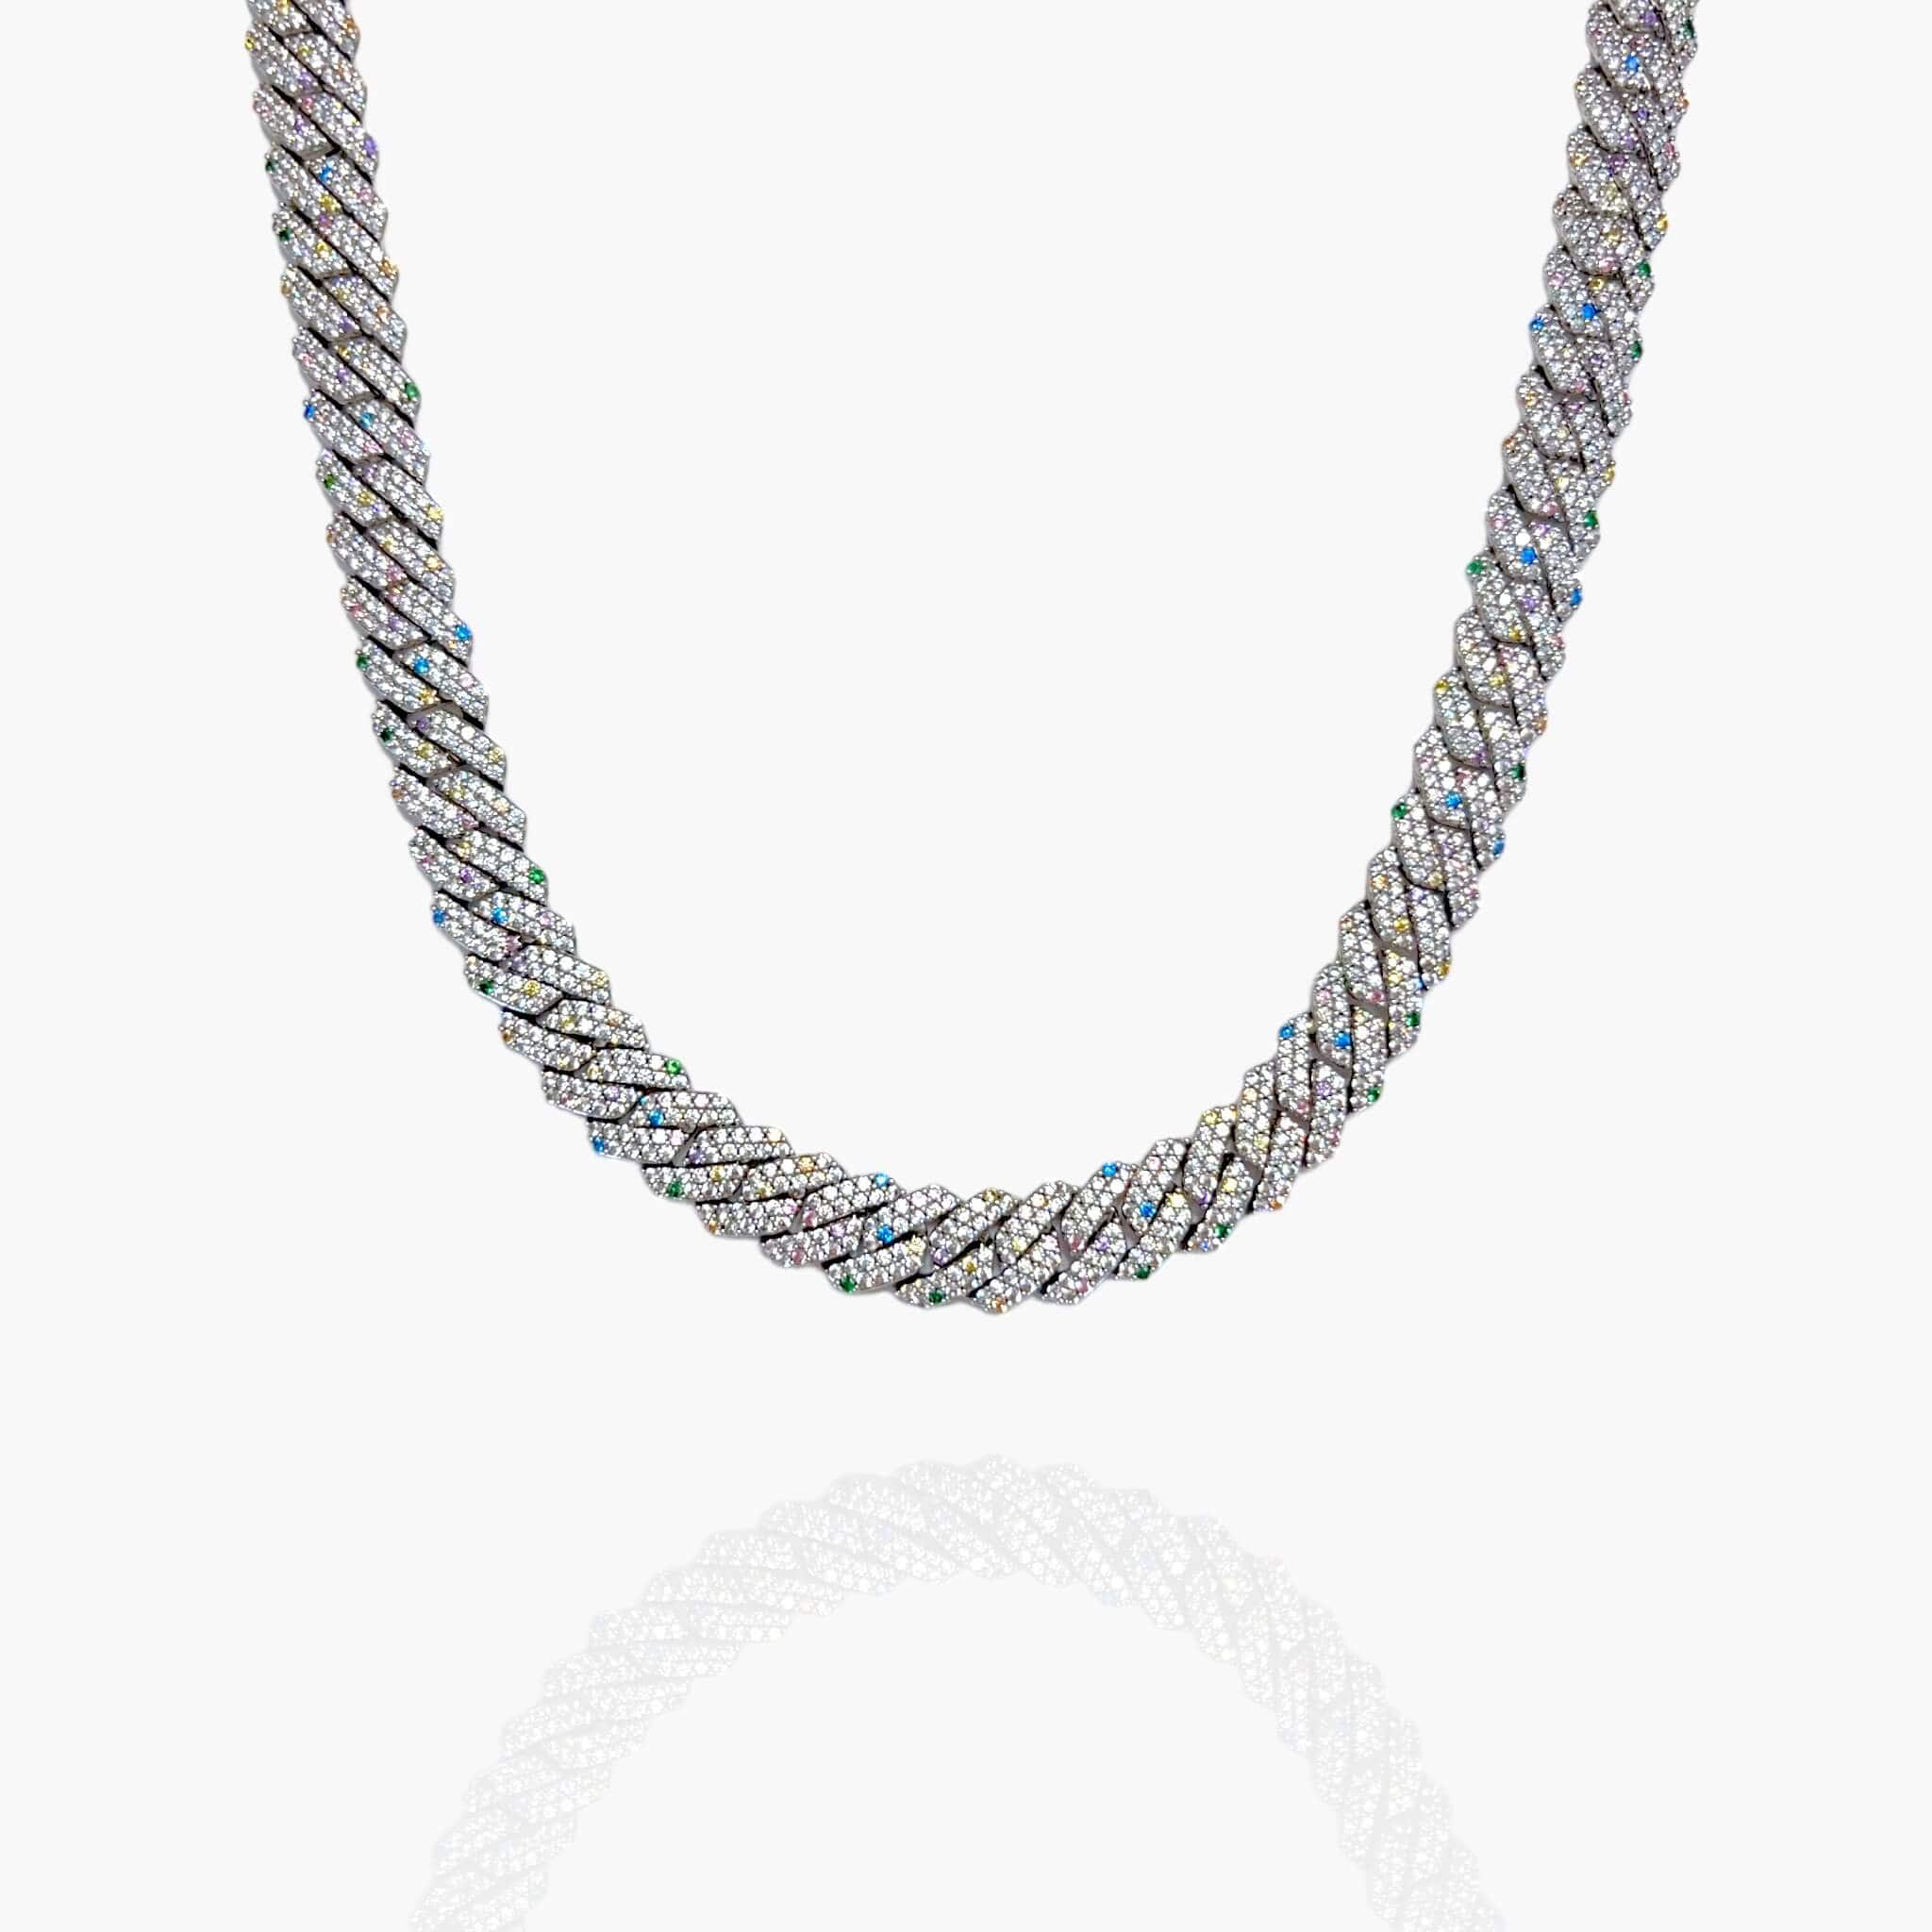 Candy Prong Link Chain 12mm - White Gold